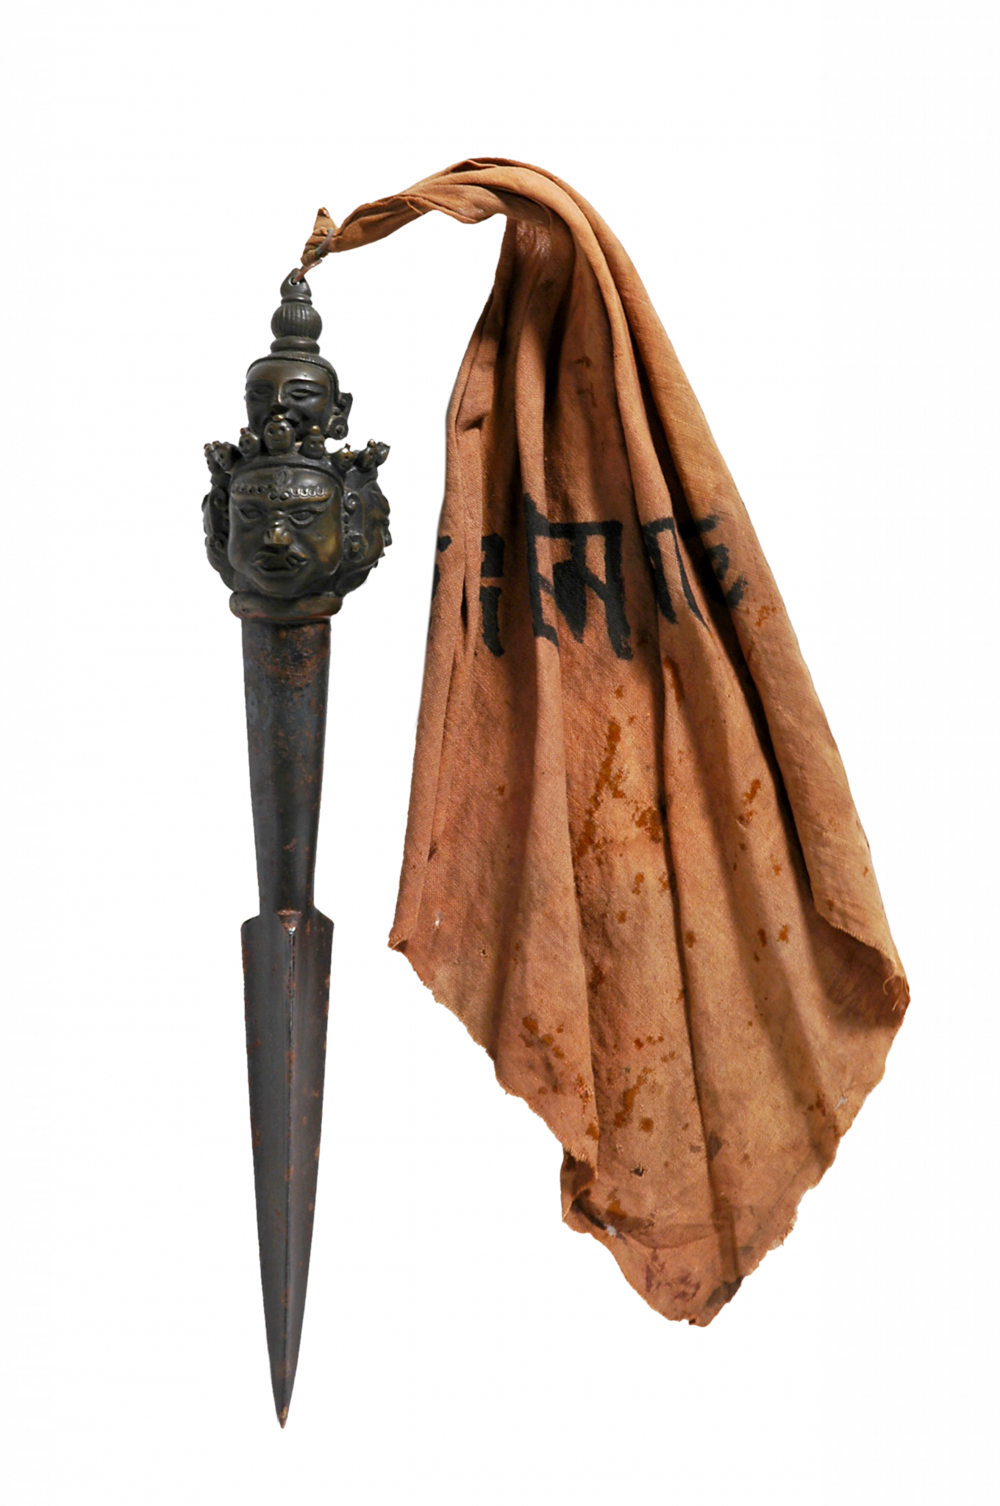 Ceremonial Dagger Featuring the God of Death